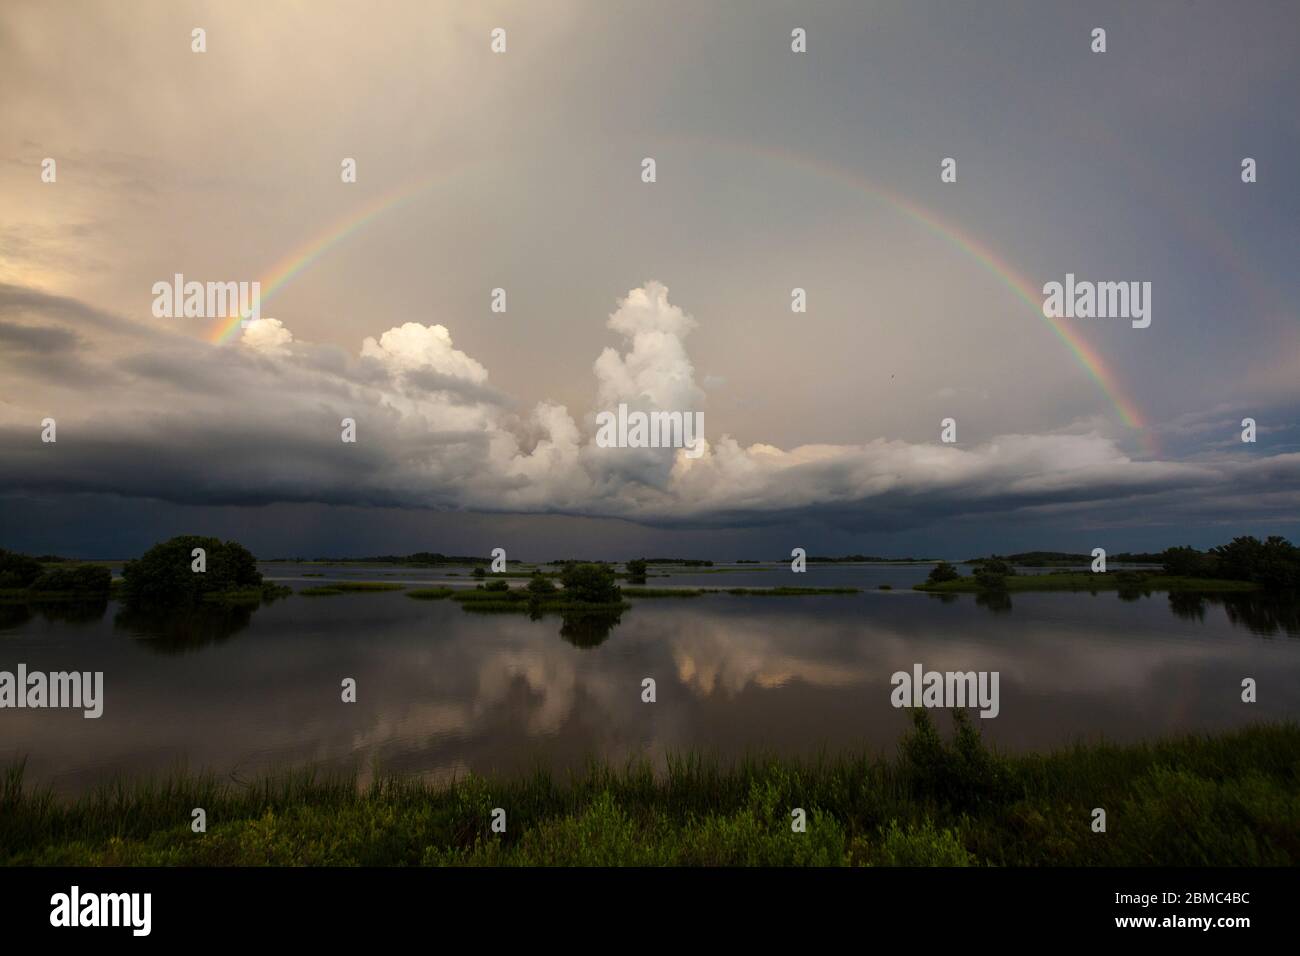 Full Rainbow over Storm Clouds Stock Photo